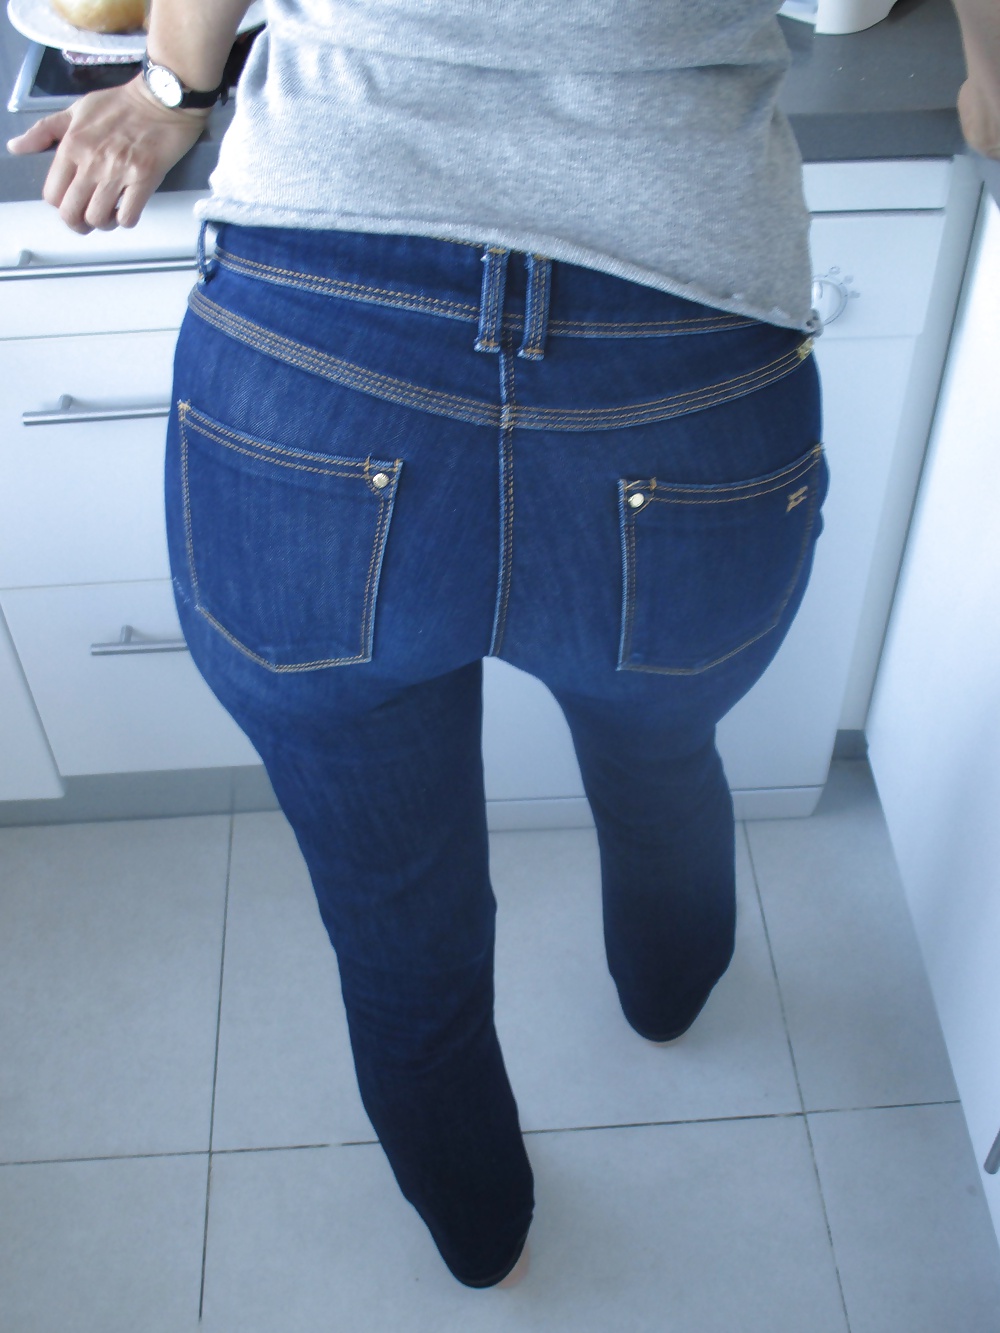 Big firm mature ass in jeans #22593280